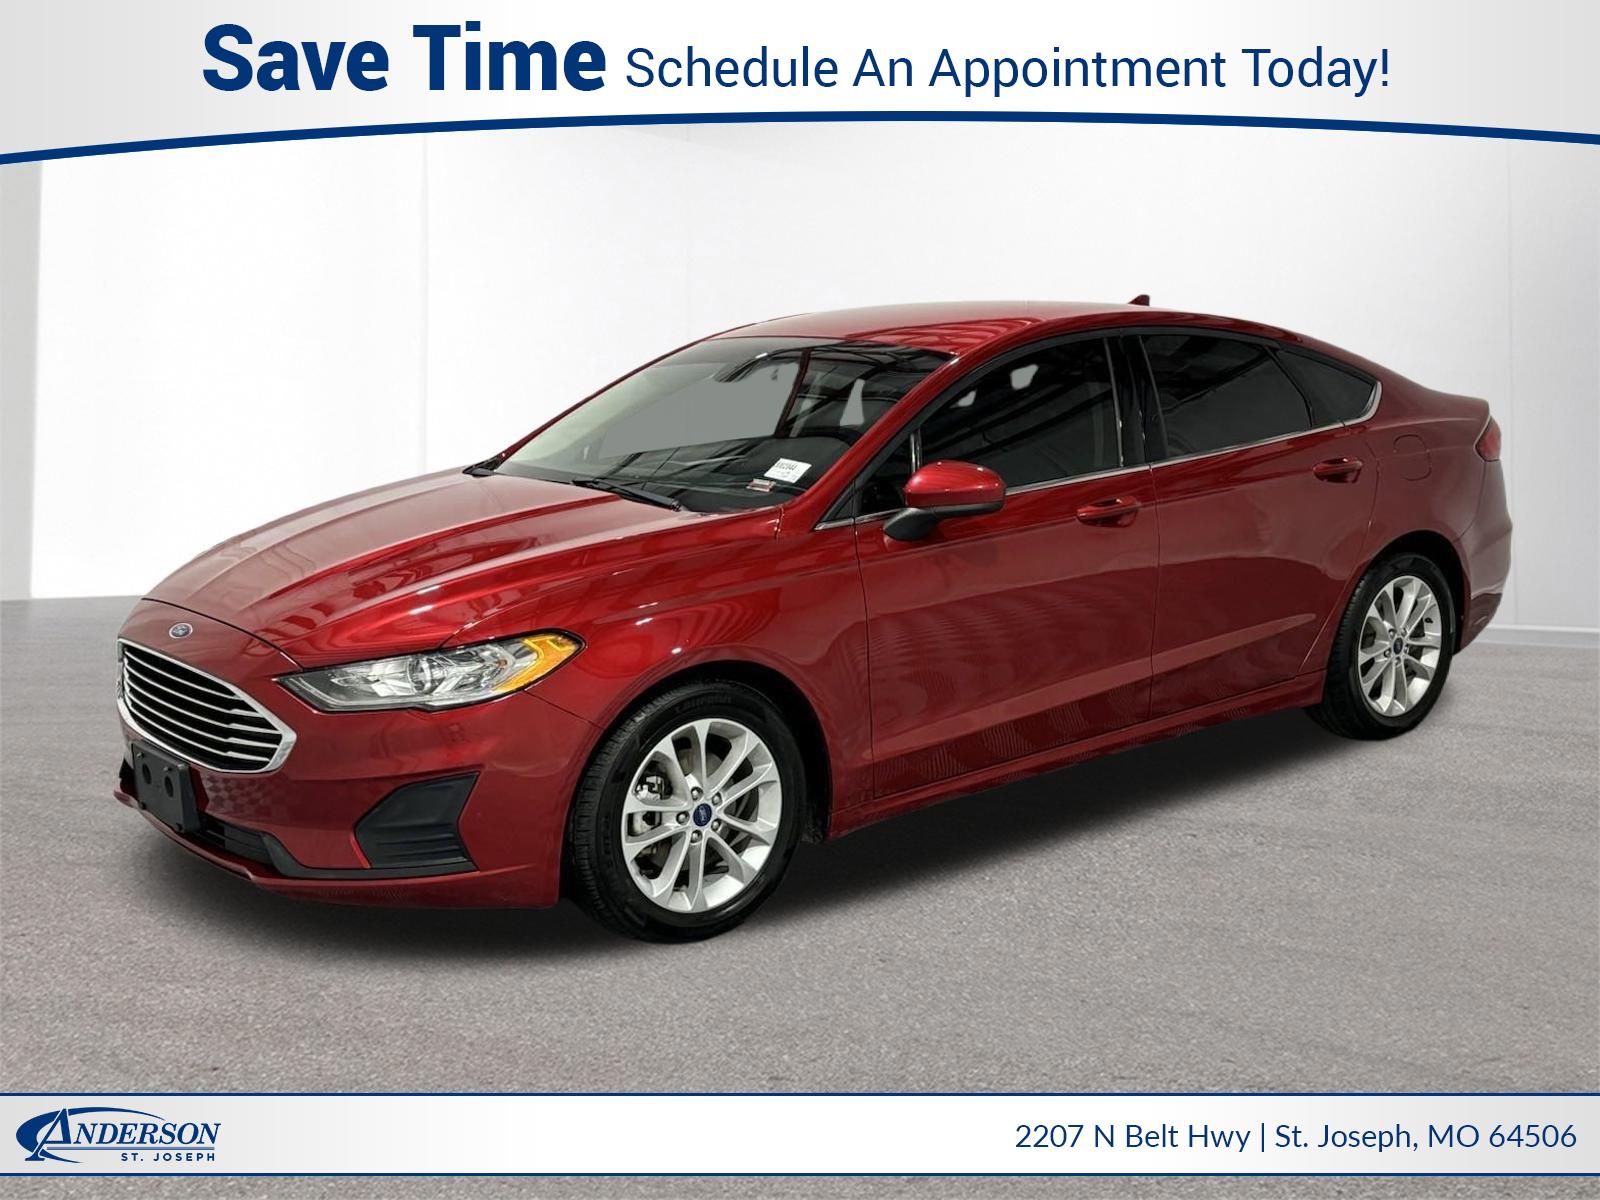 Used 2020 Ford Fusion SE Stock: 3002044